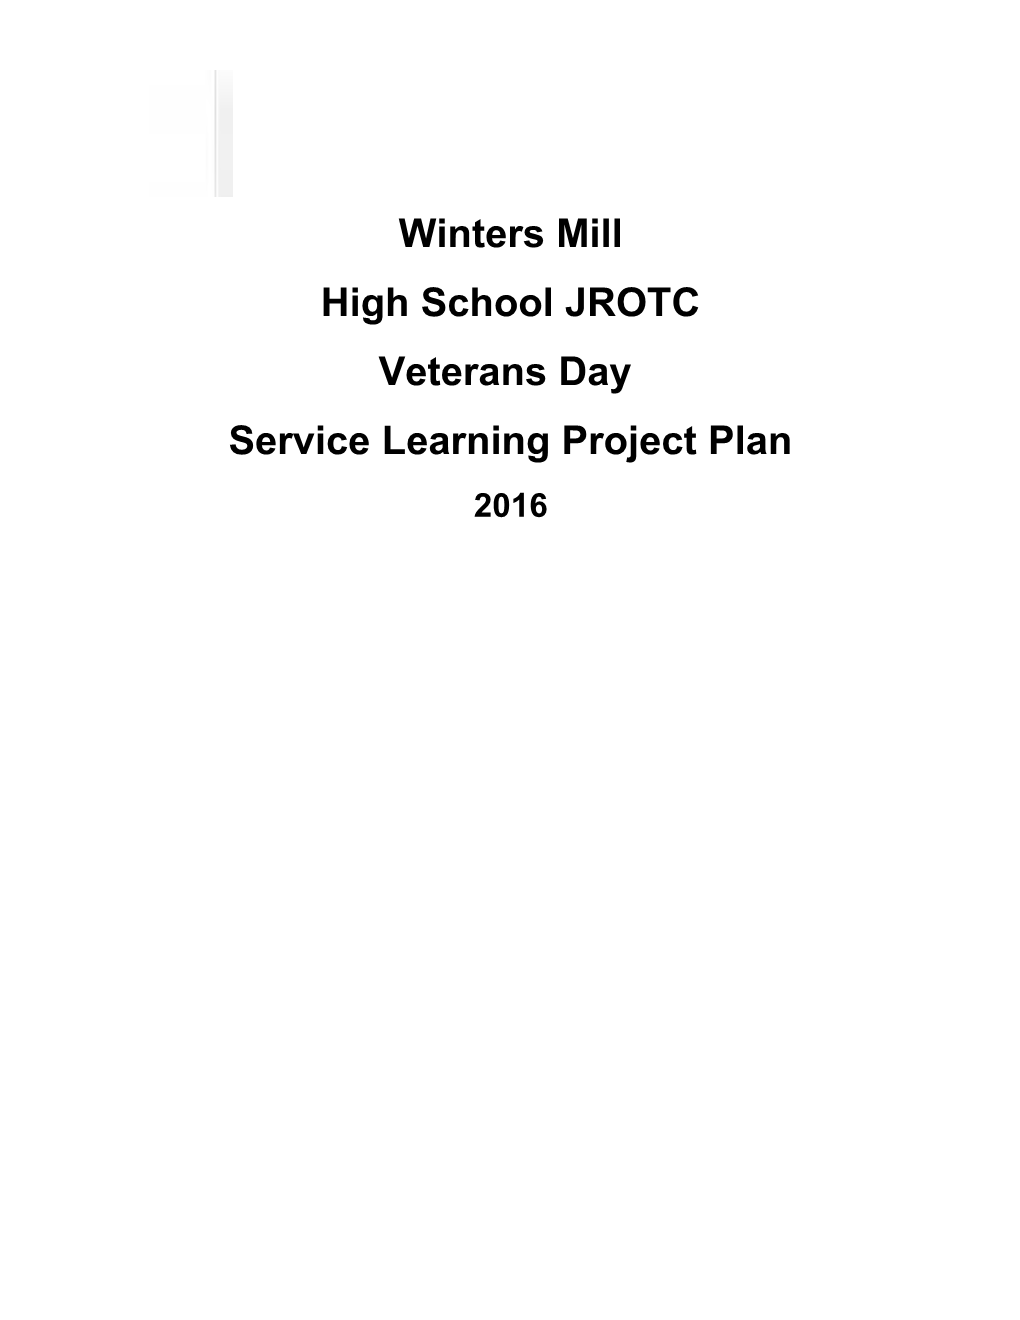 Service Learning Project Plan